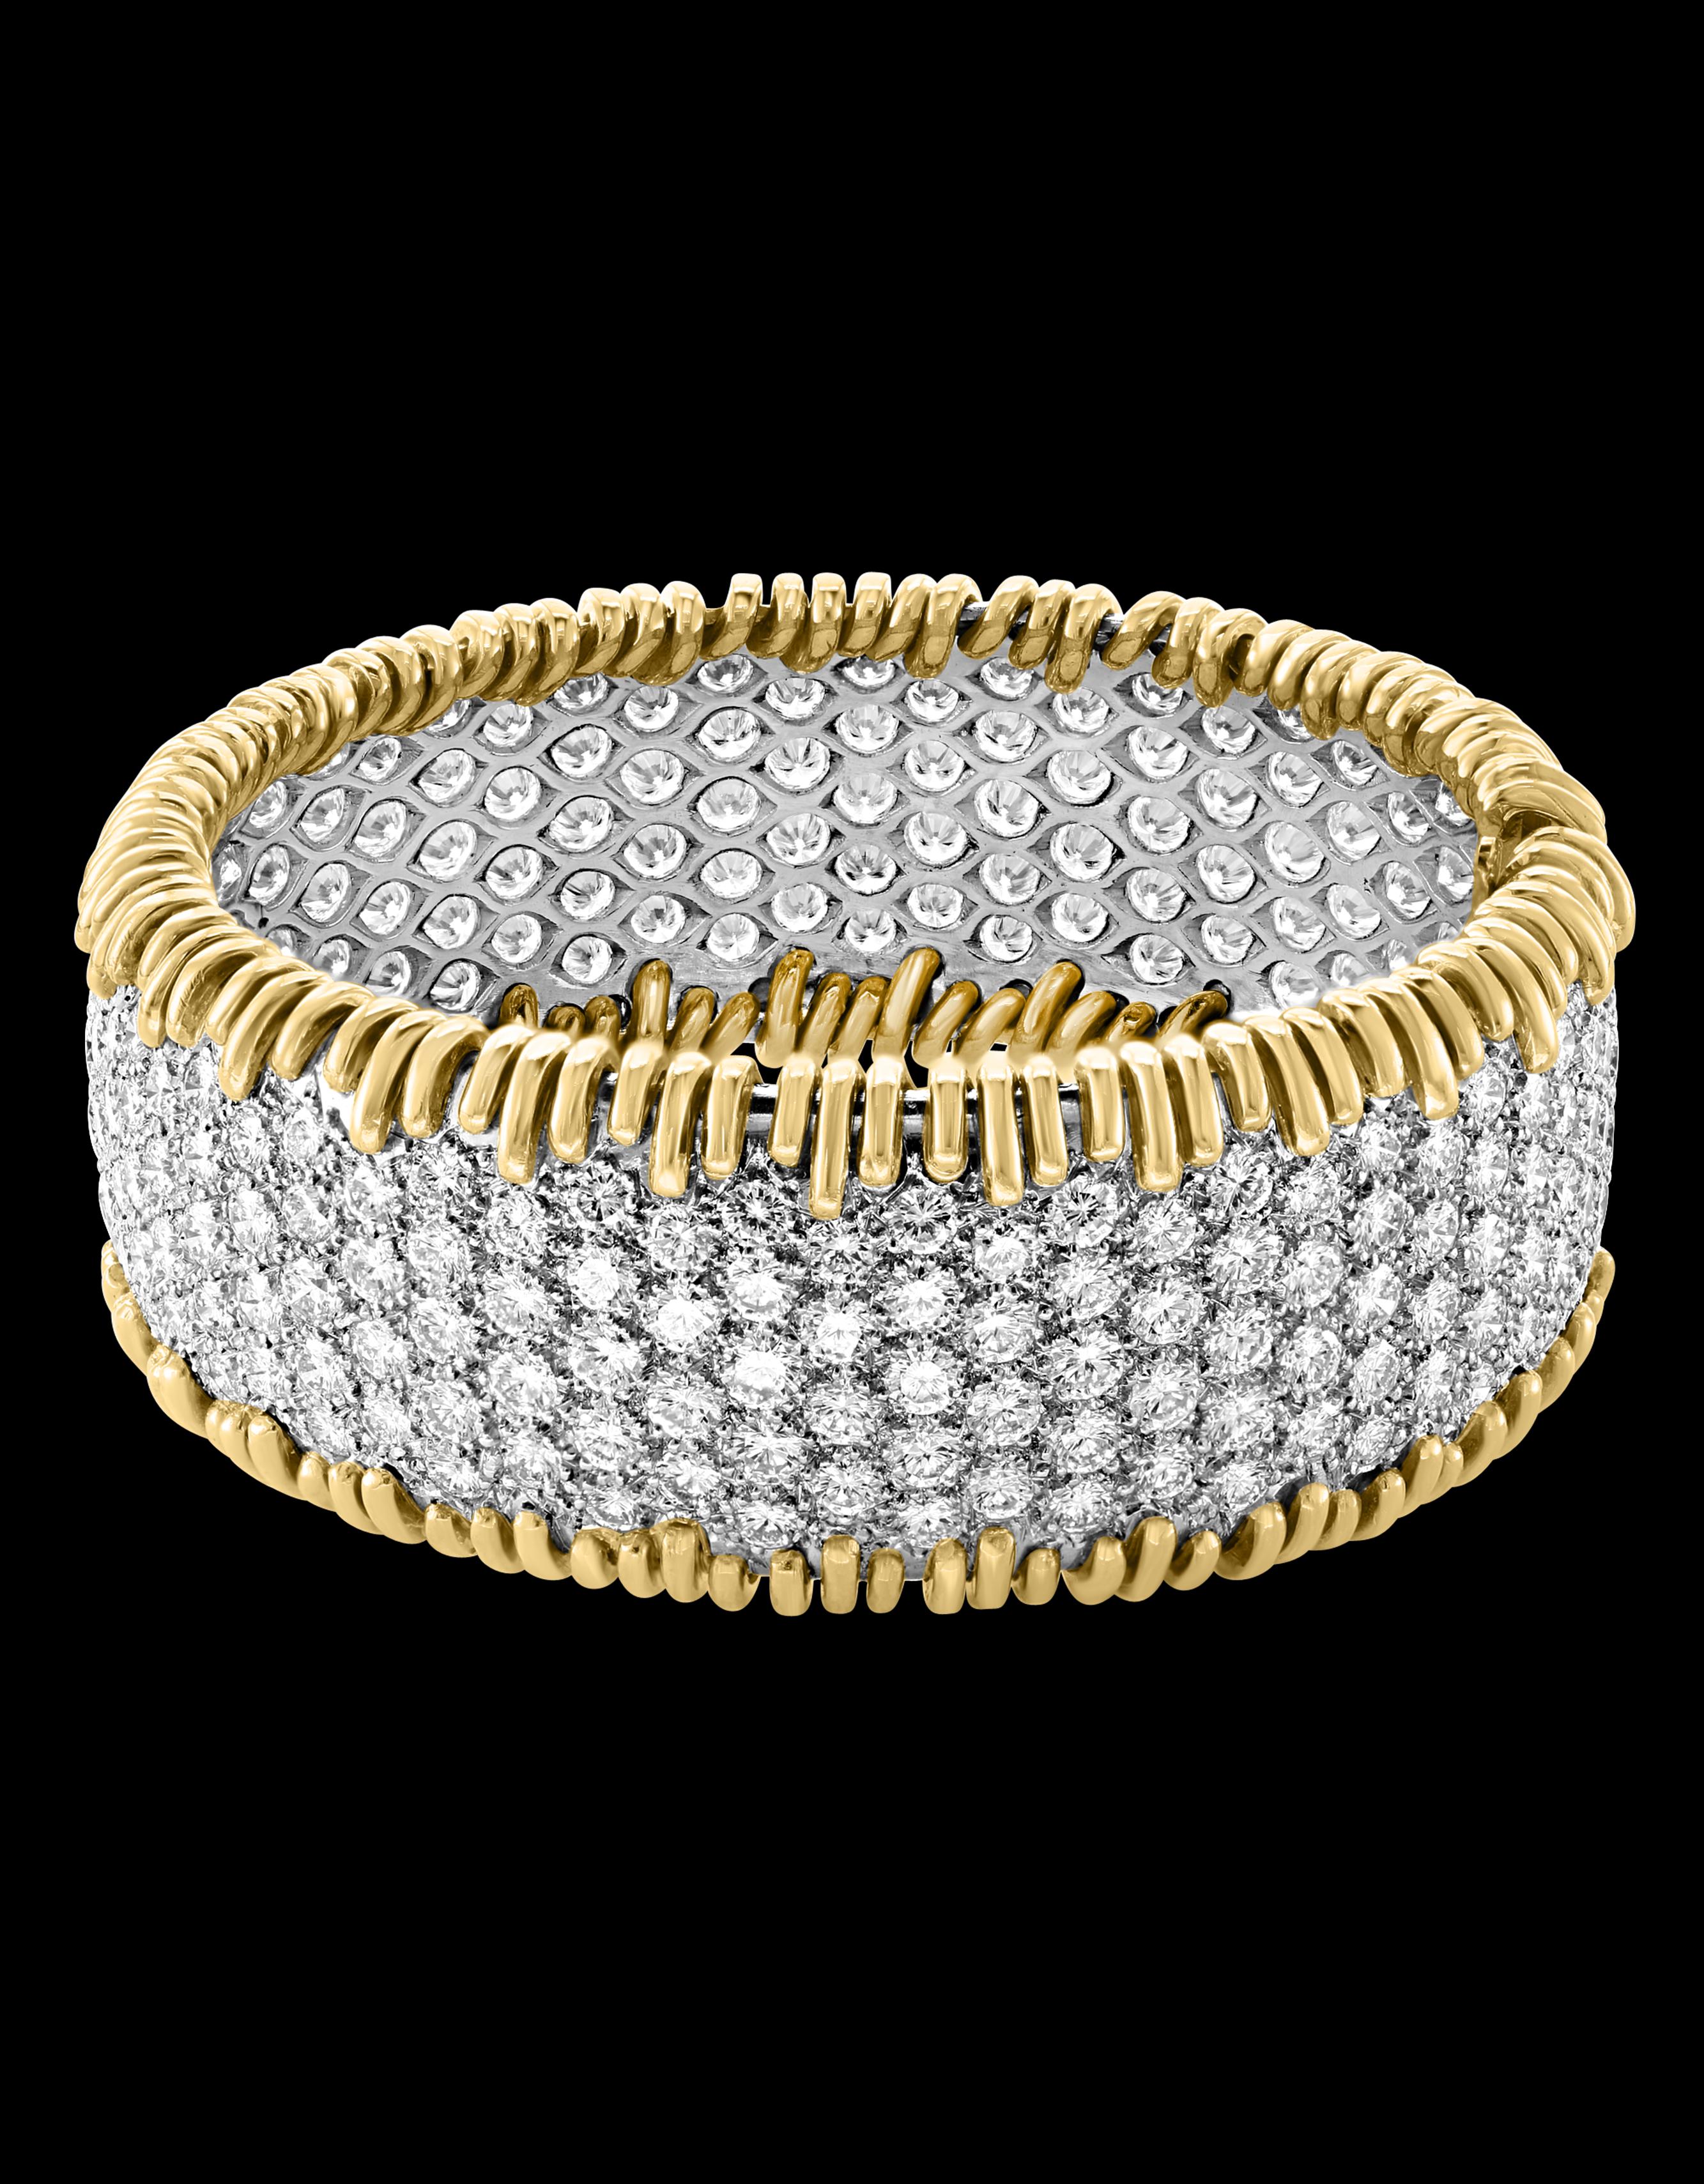 41 Carat Diamonds VS1 Quality E-F Color 18 Karat Gold/Platinum 132 Grams Bangle
It features a bangle style Bracelet crafted from an 18 K Yellow gold and Platinum. Embedded with 41 Carats of Round brilliant diamonds of the top quality nearly flawless